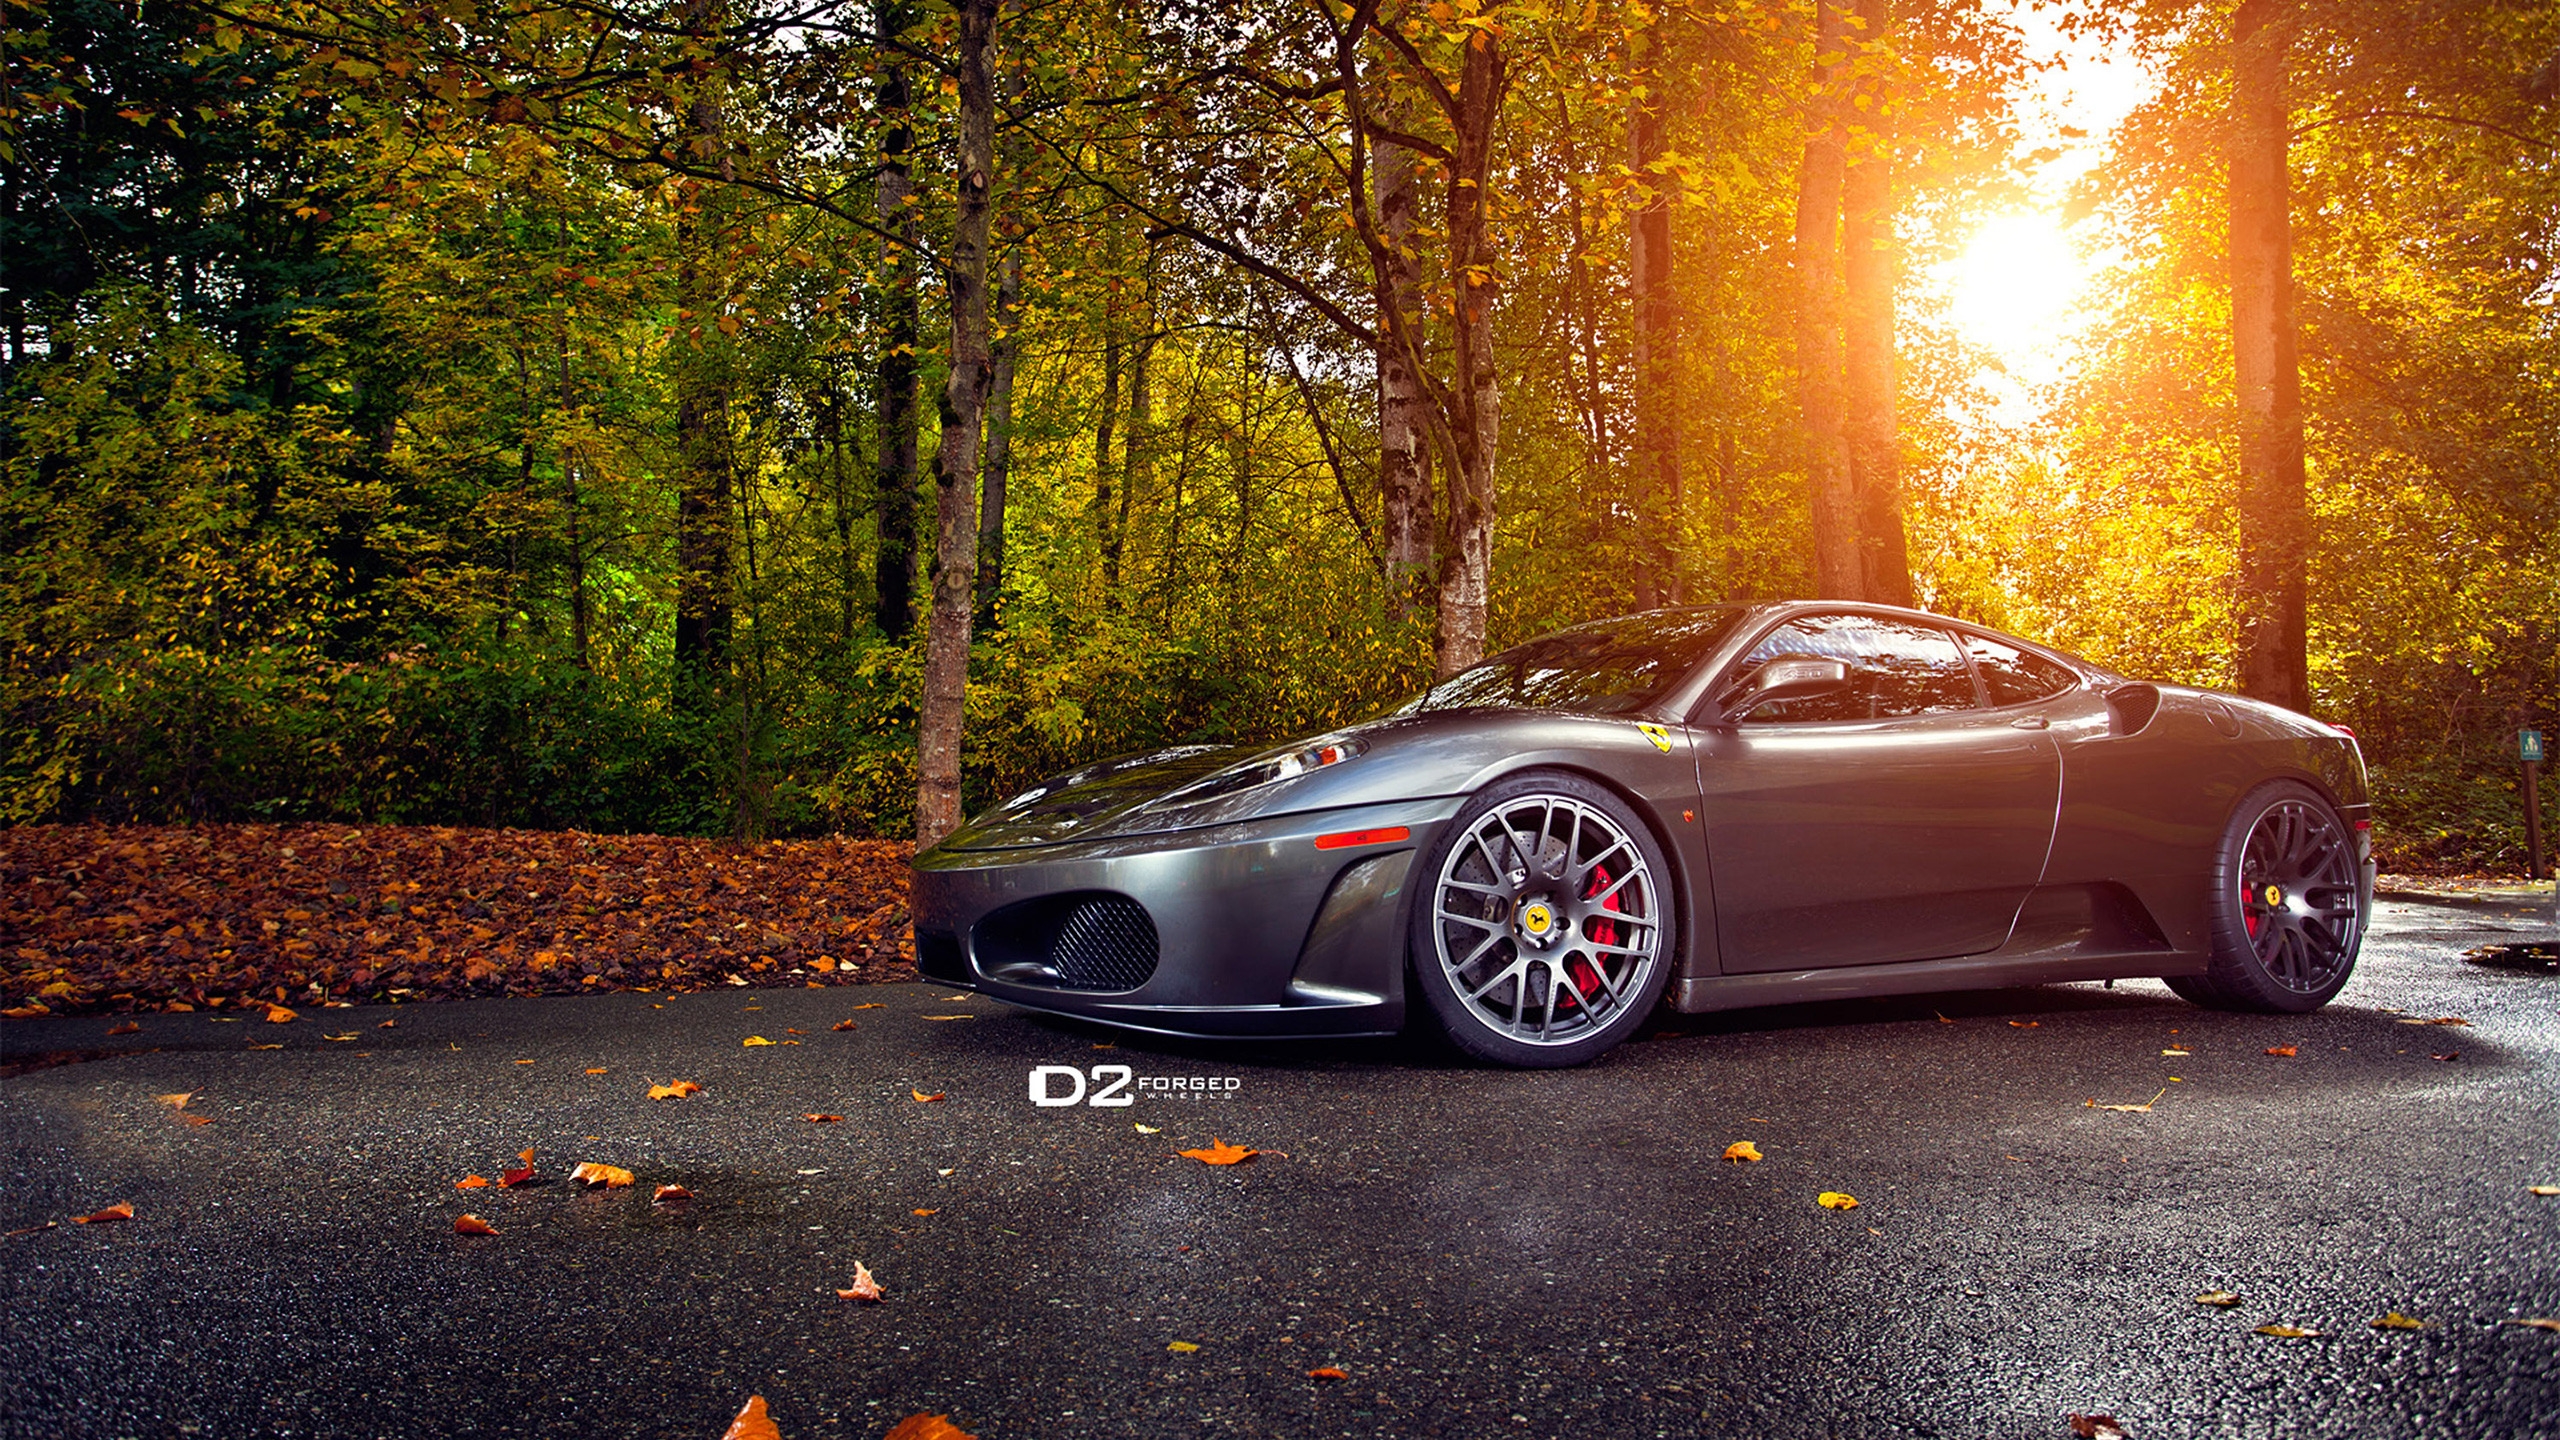 Amazing Ferrari by D2Forged for 2560x1440 HDTV resolution